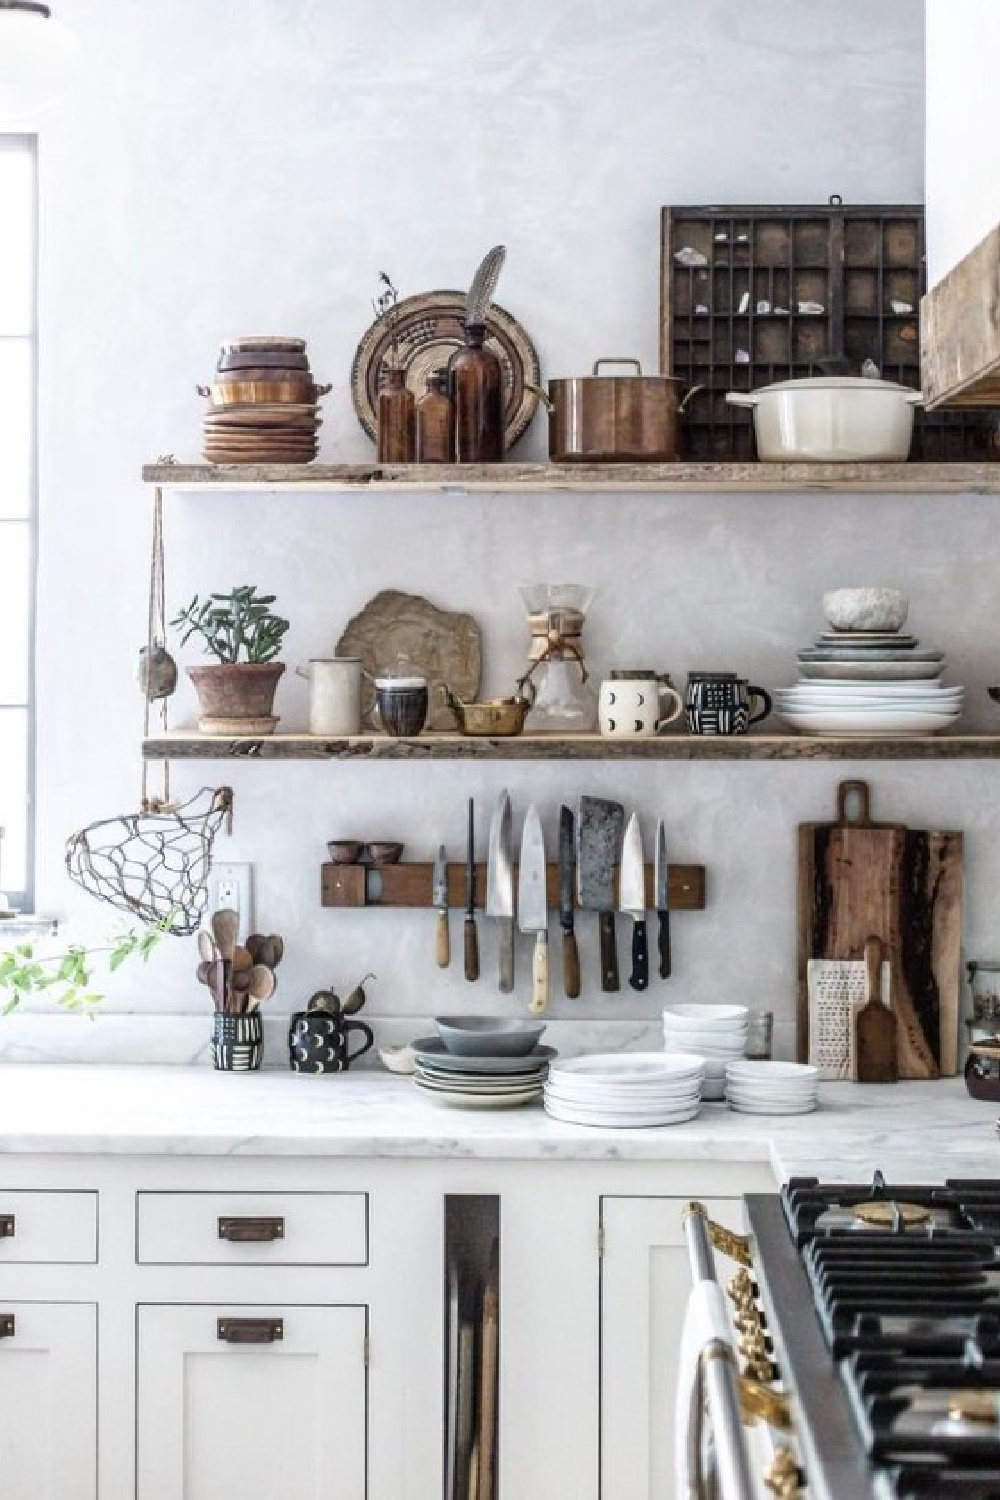 Beautifully rustic yet serene kitchen with neutral tones and marble counters - @bethkirby. #rustickitchen #floatingshelves